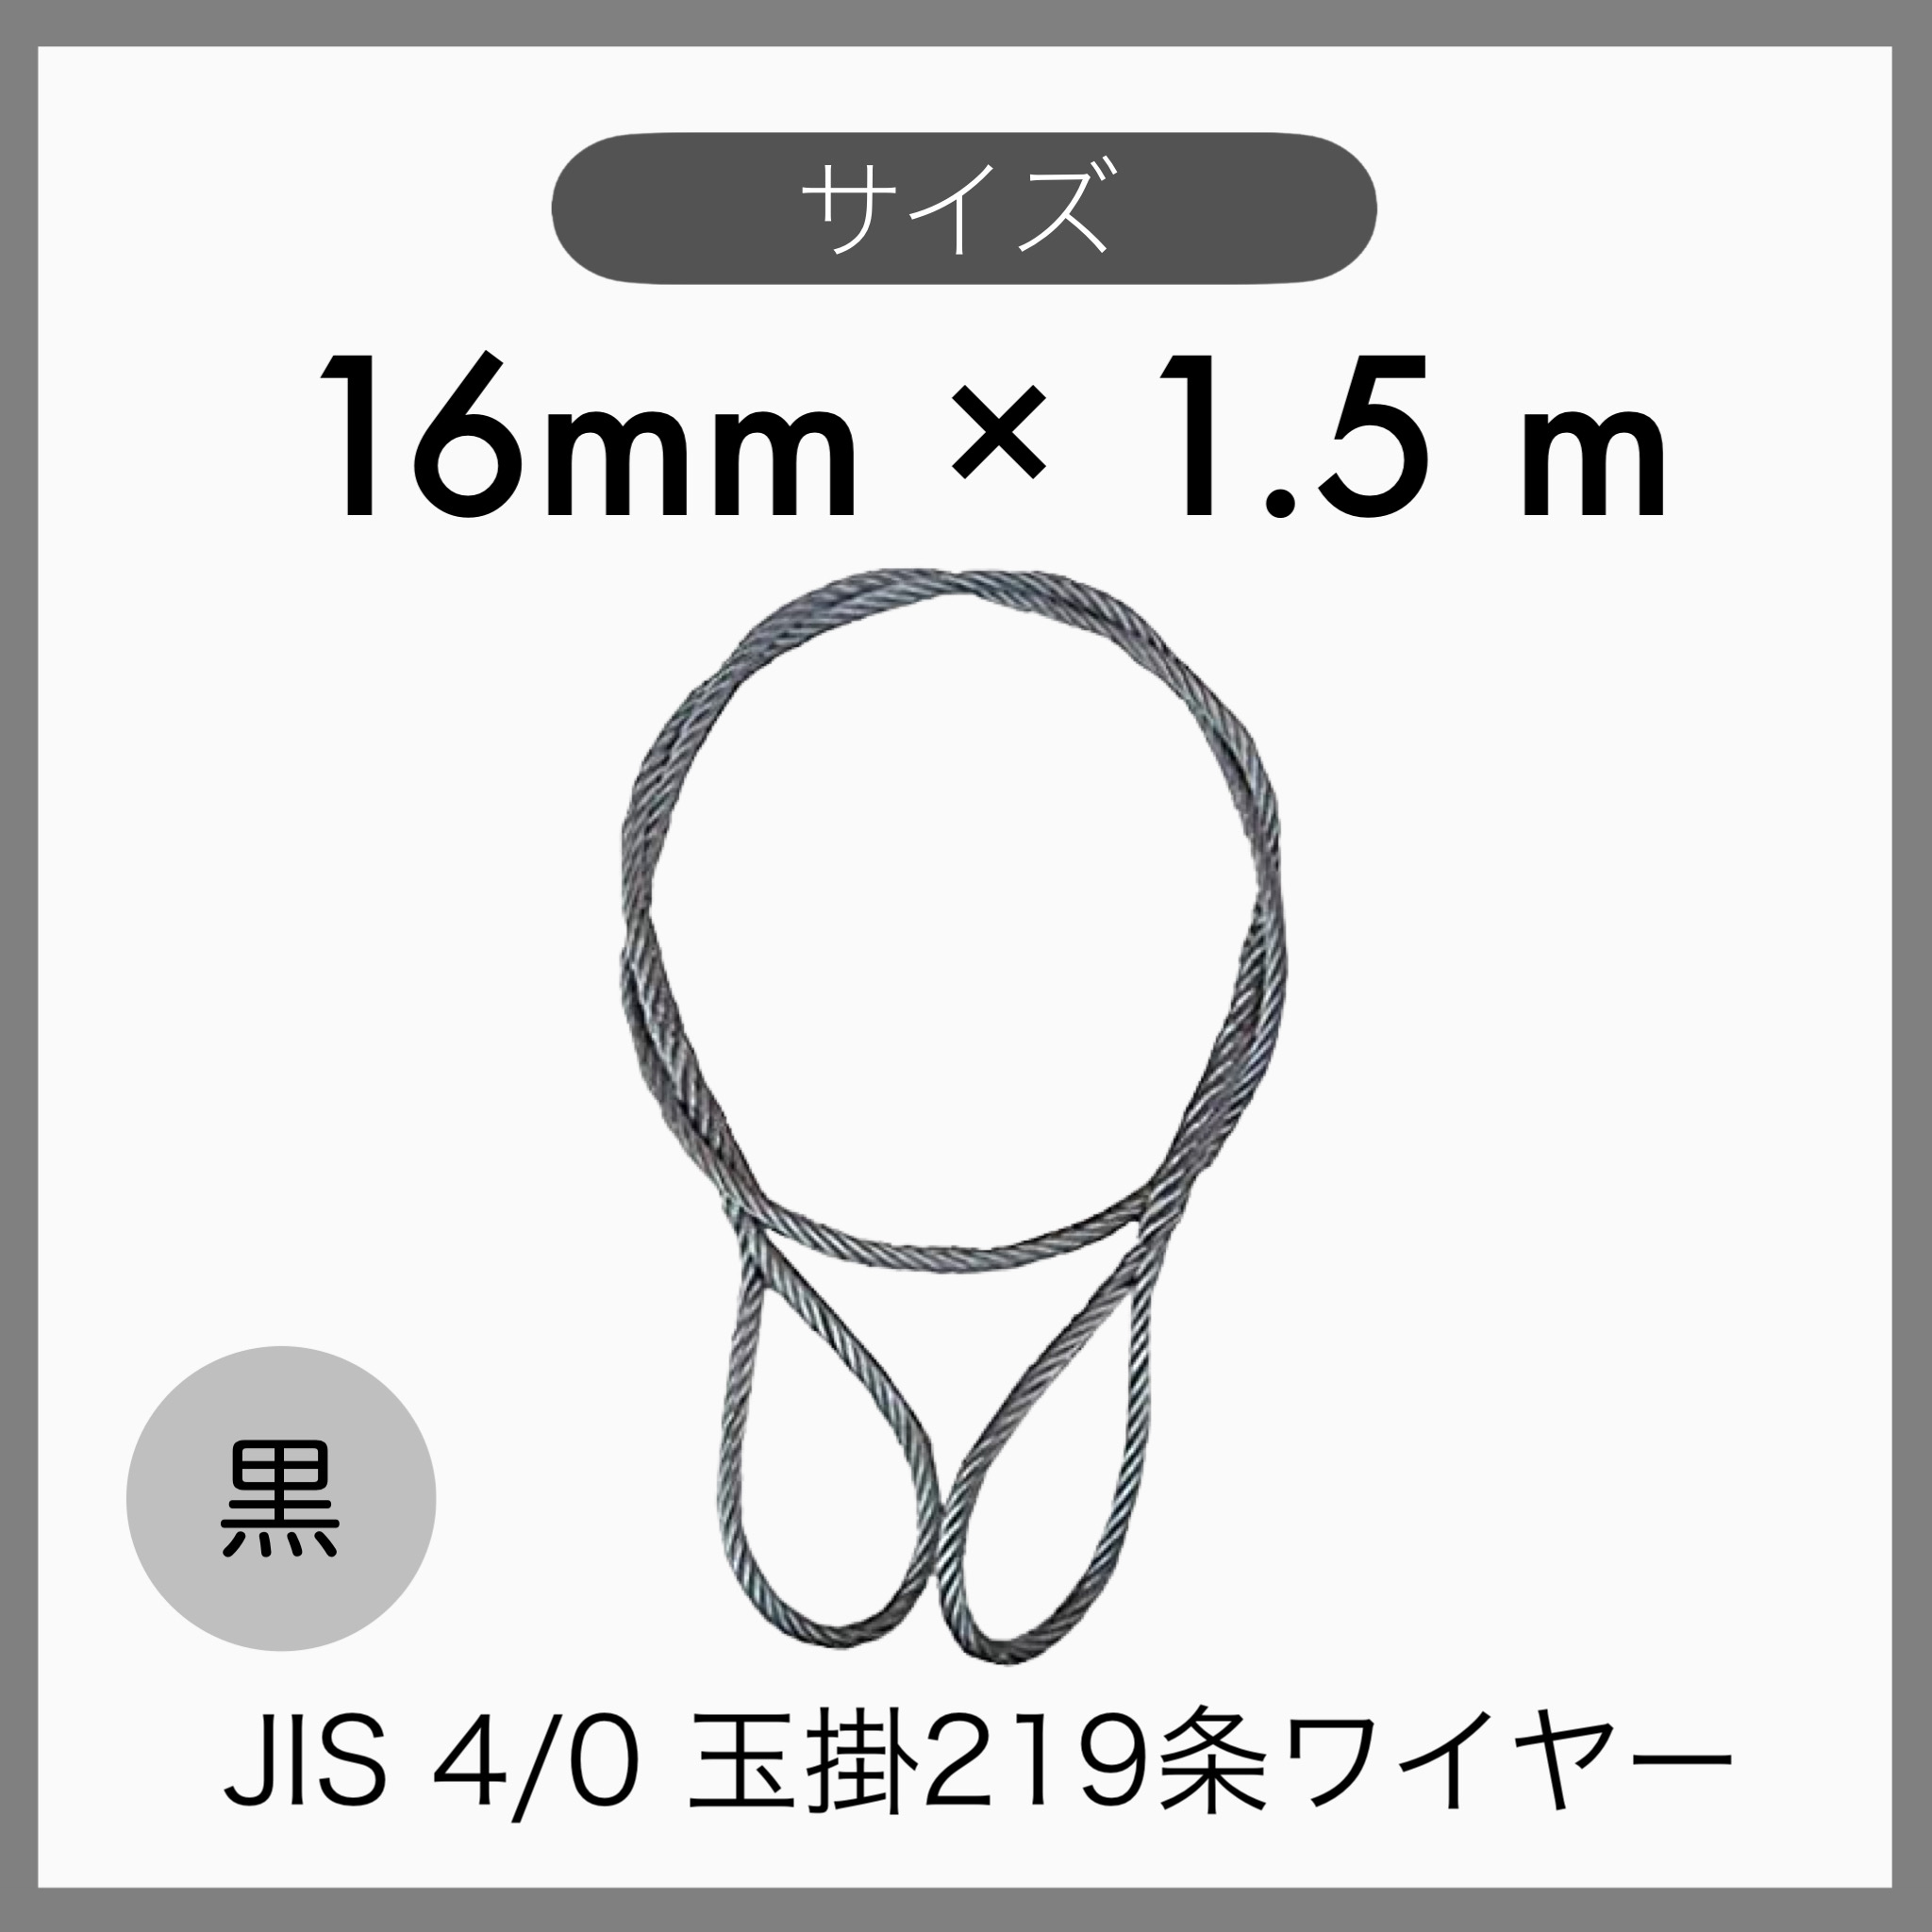 10 pcs set JIS O/O black sphere .. wire sphere ..219 article wire knitting imported goods 16mm×1.5m